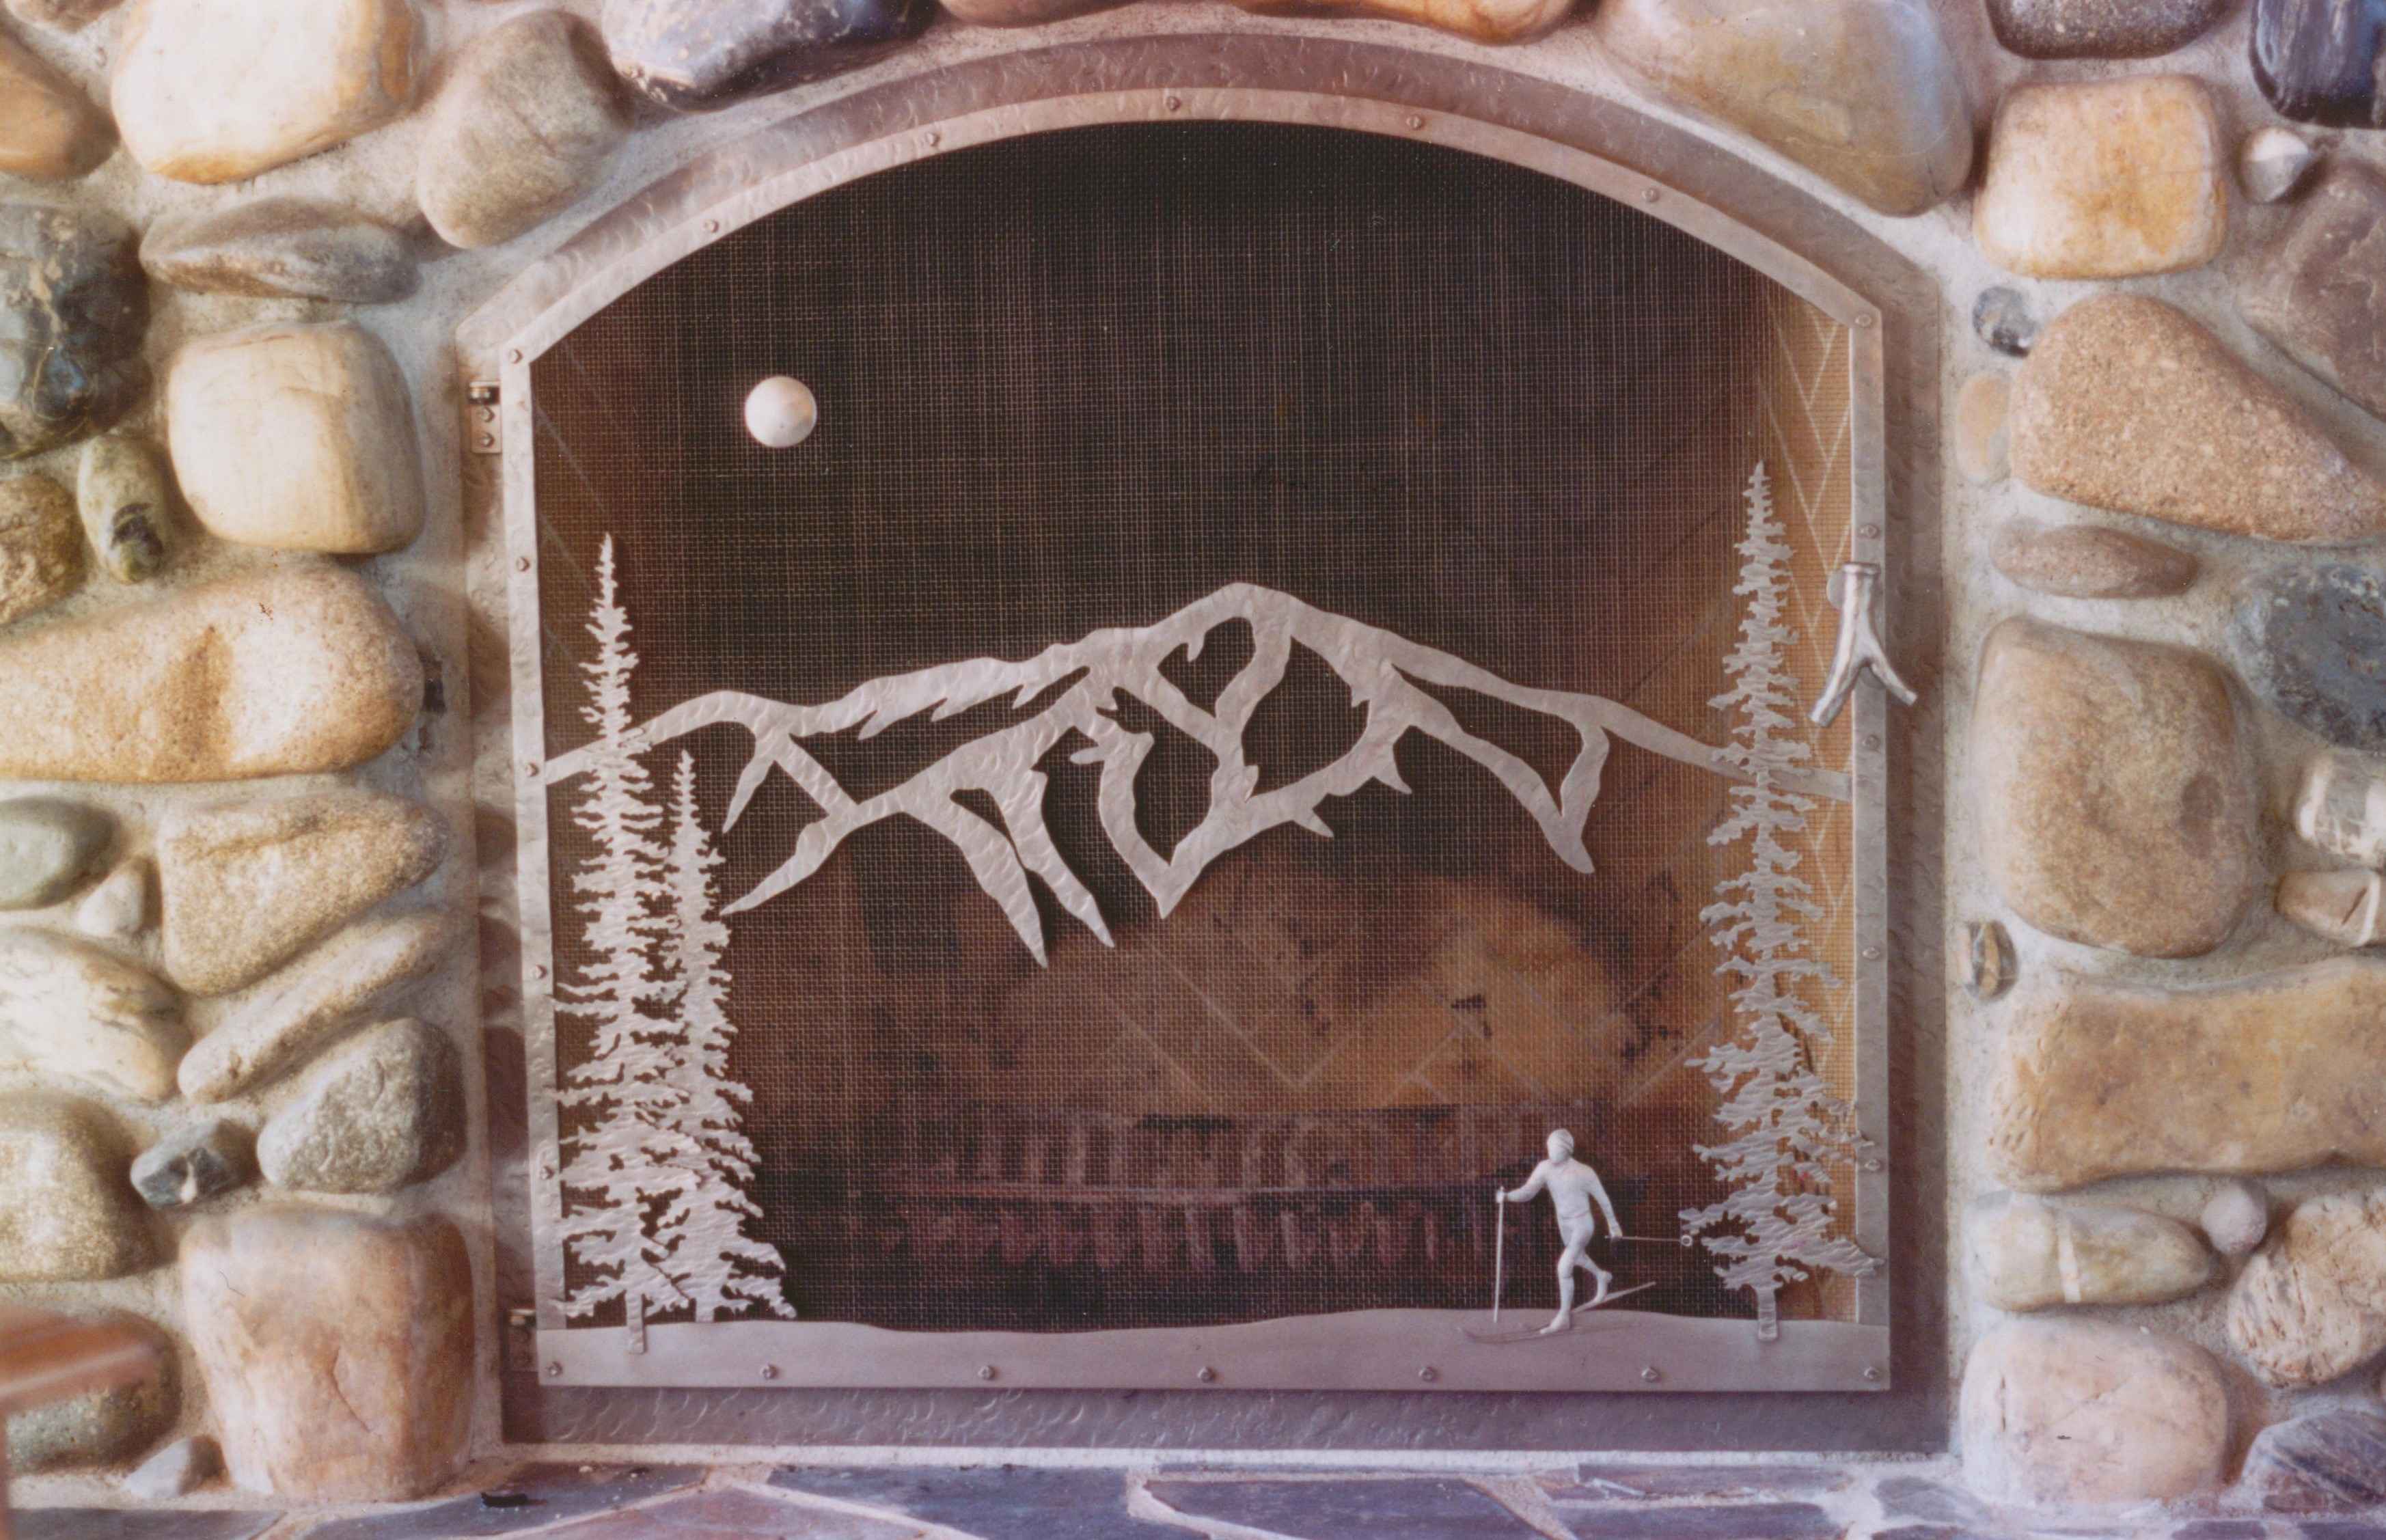  Fire Screens - Handcrafted By Wiederrick